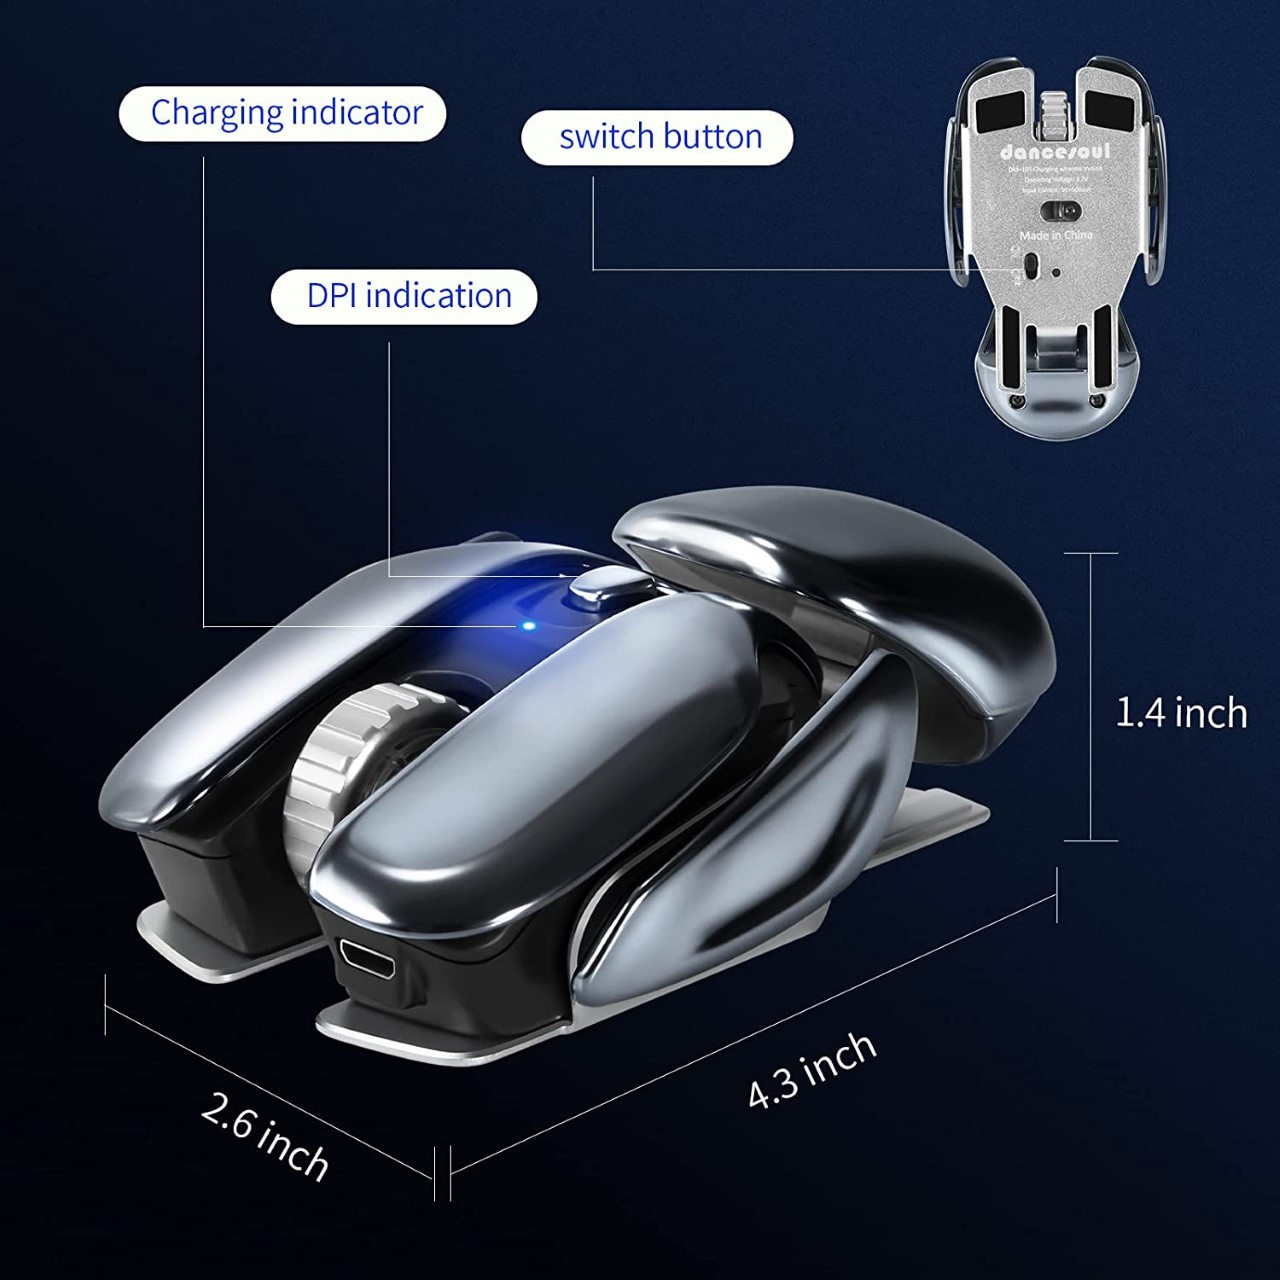 Biofuturistic wireless mouse was designed to perfectly complement your edgy gaming PC setup